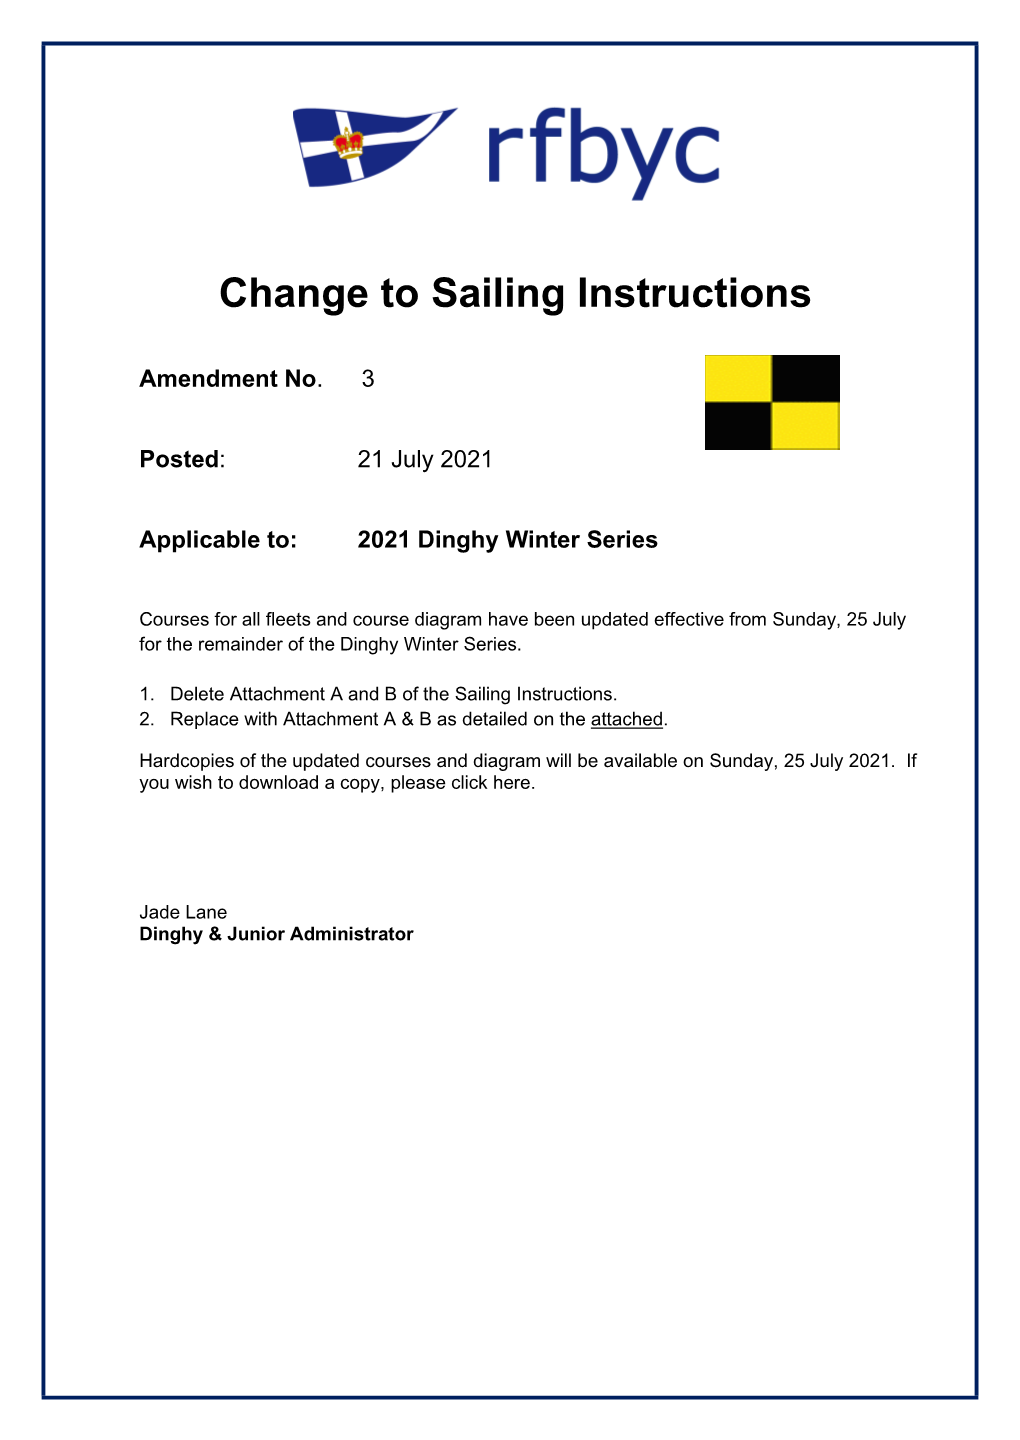 Change to Sailing Instructions